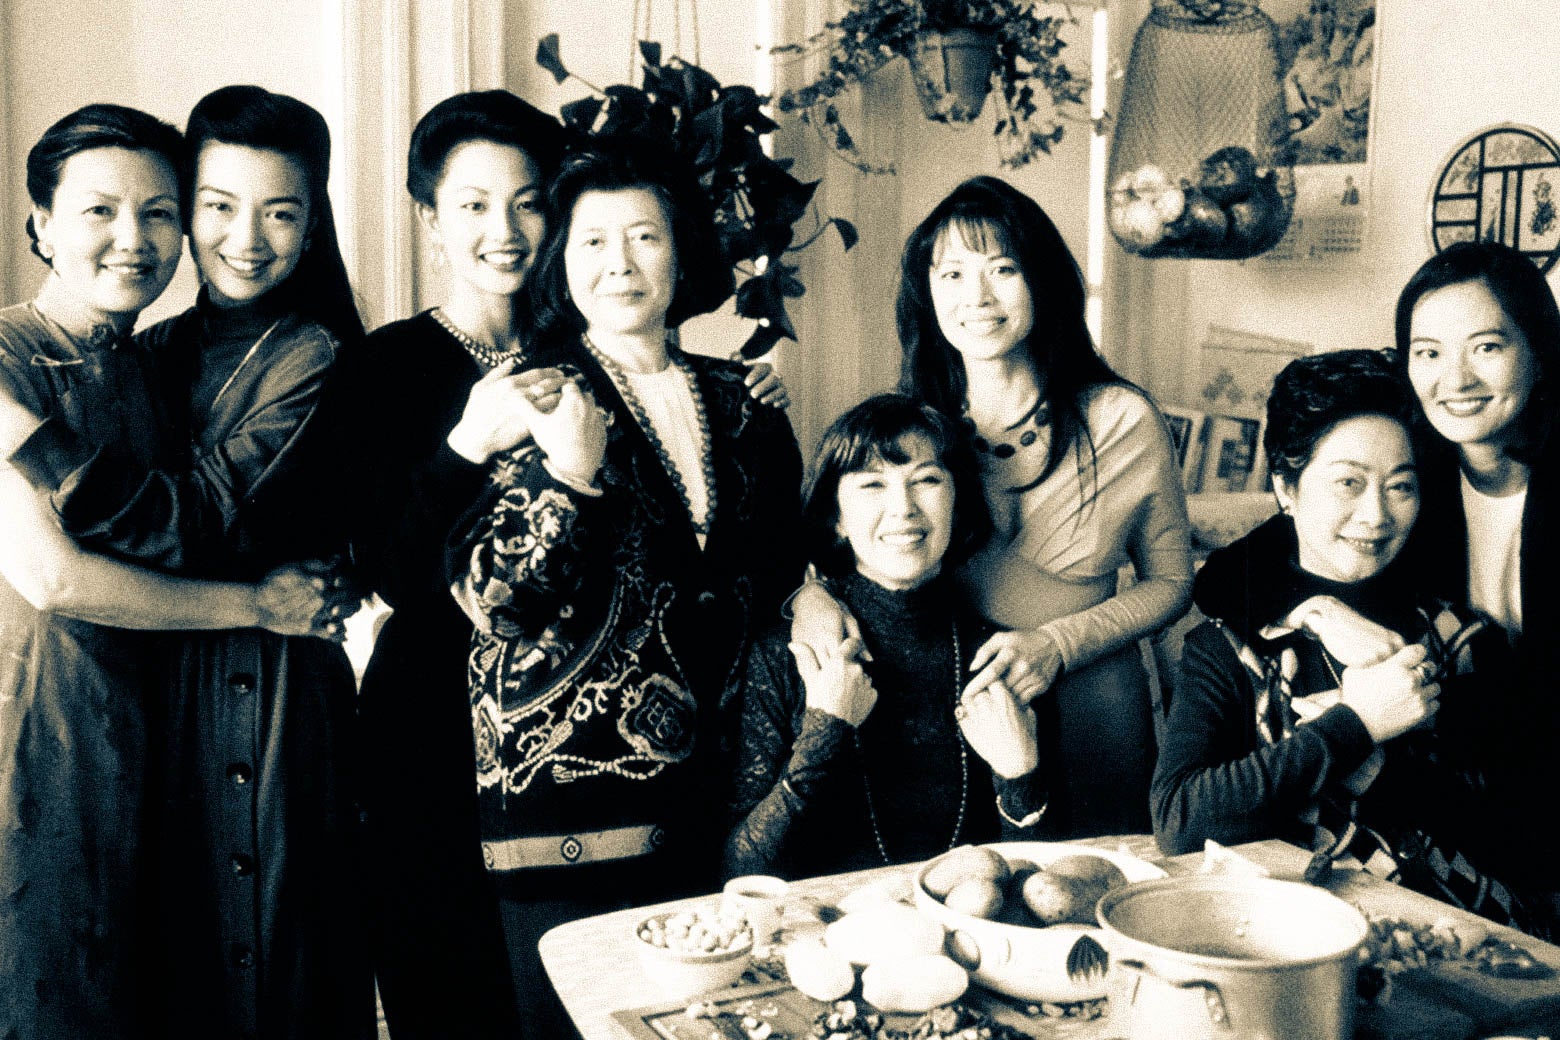 The women of The Joy Luck Club.